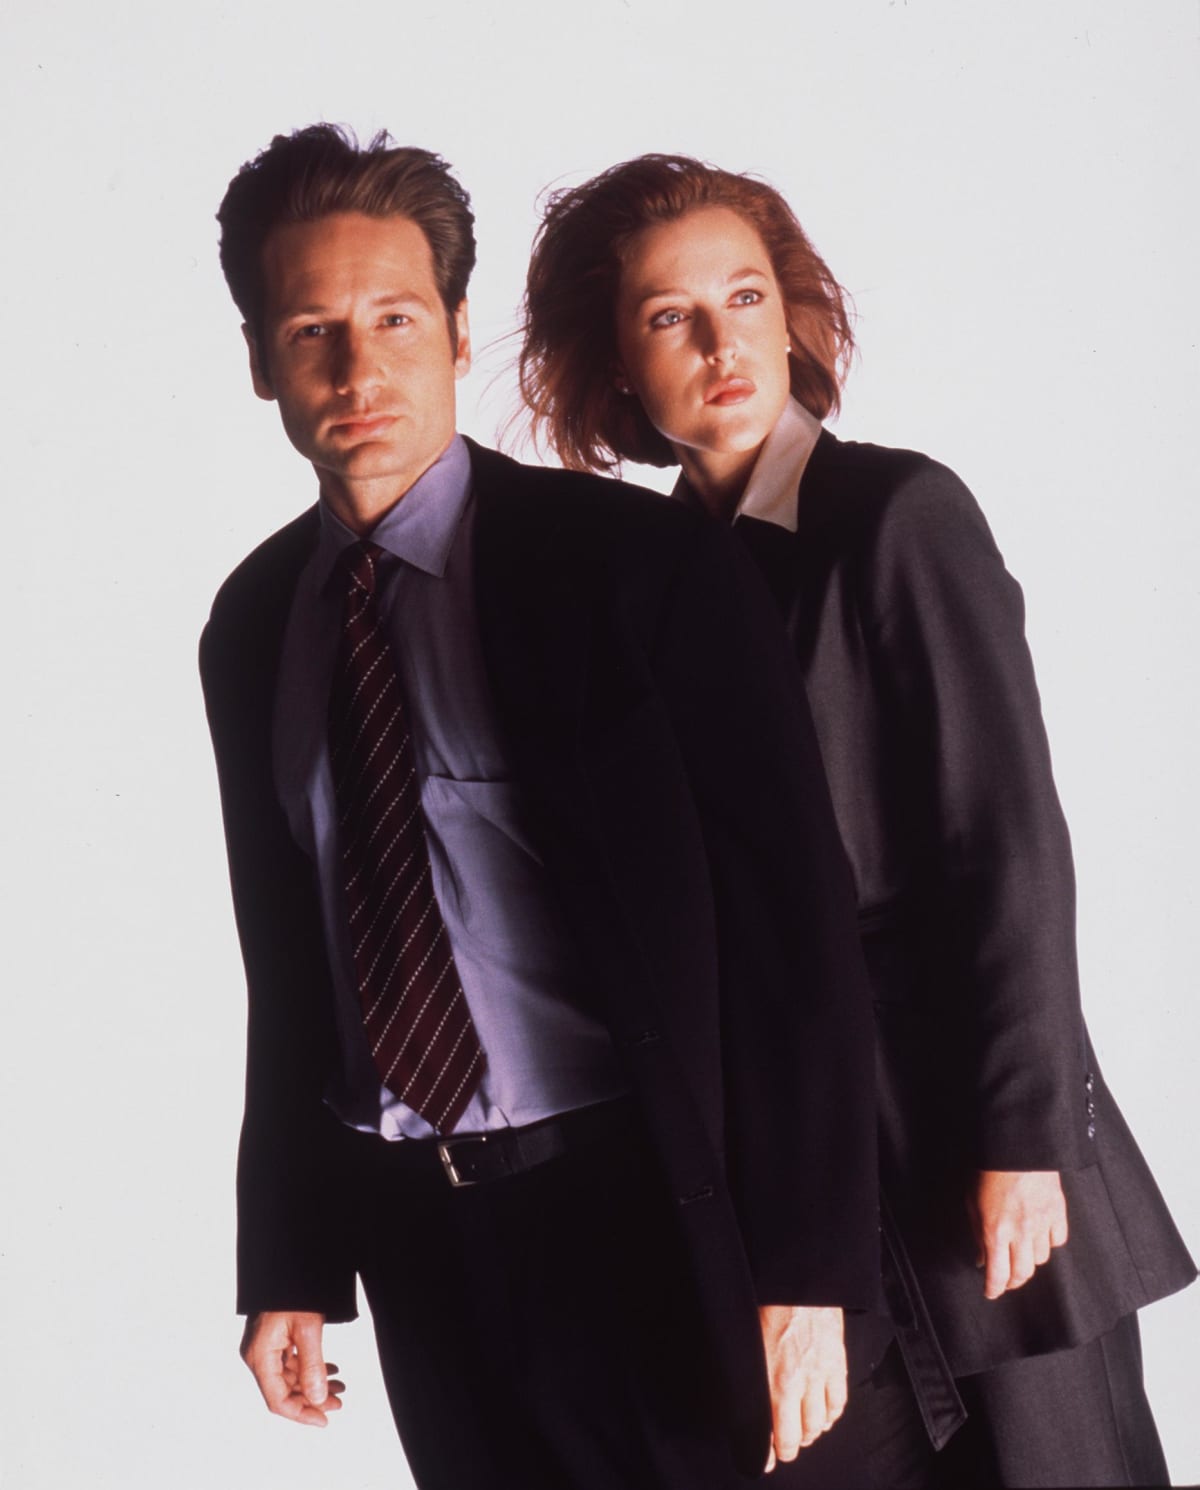 David Duchovny and Gillian Anderson star in The X-Files